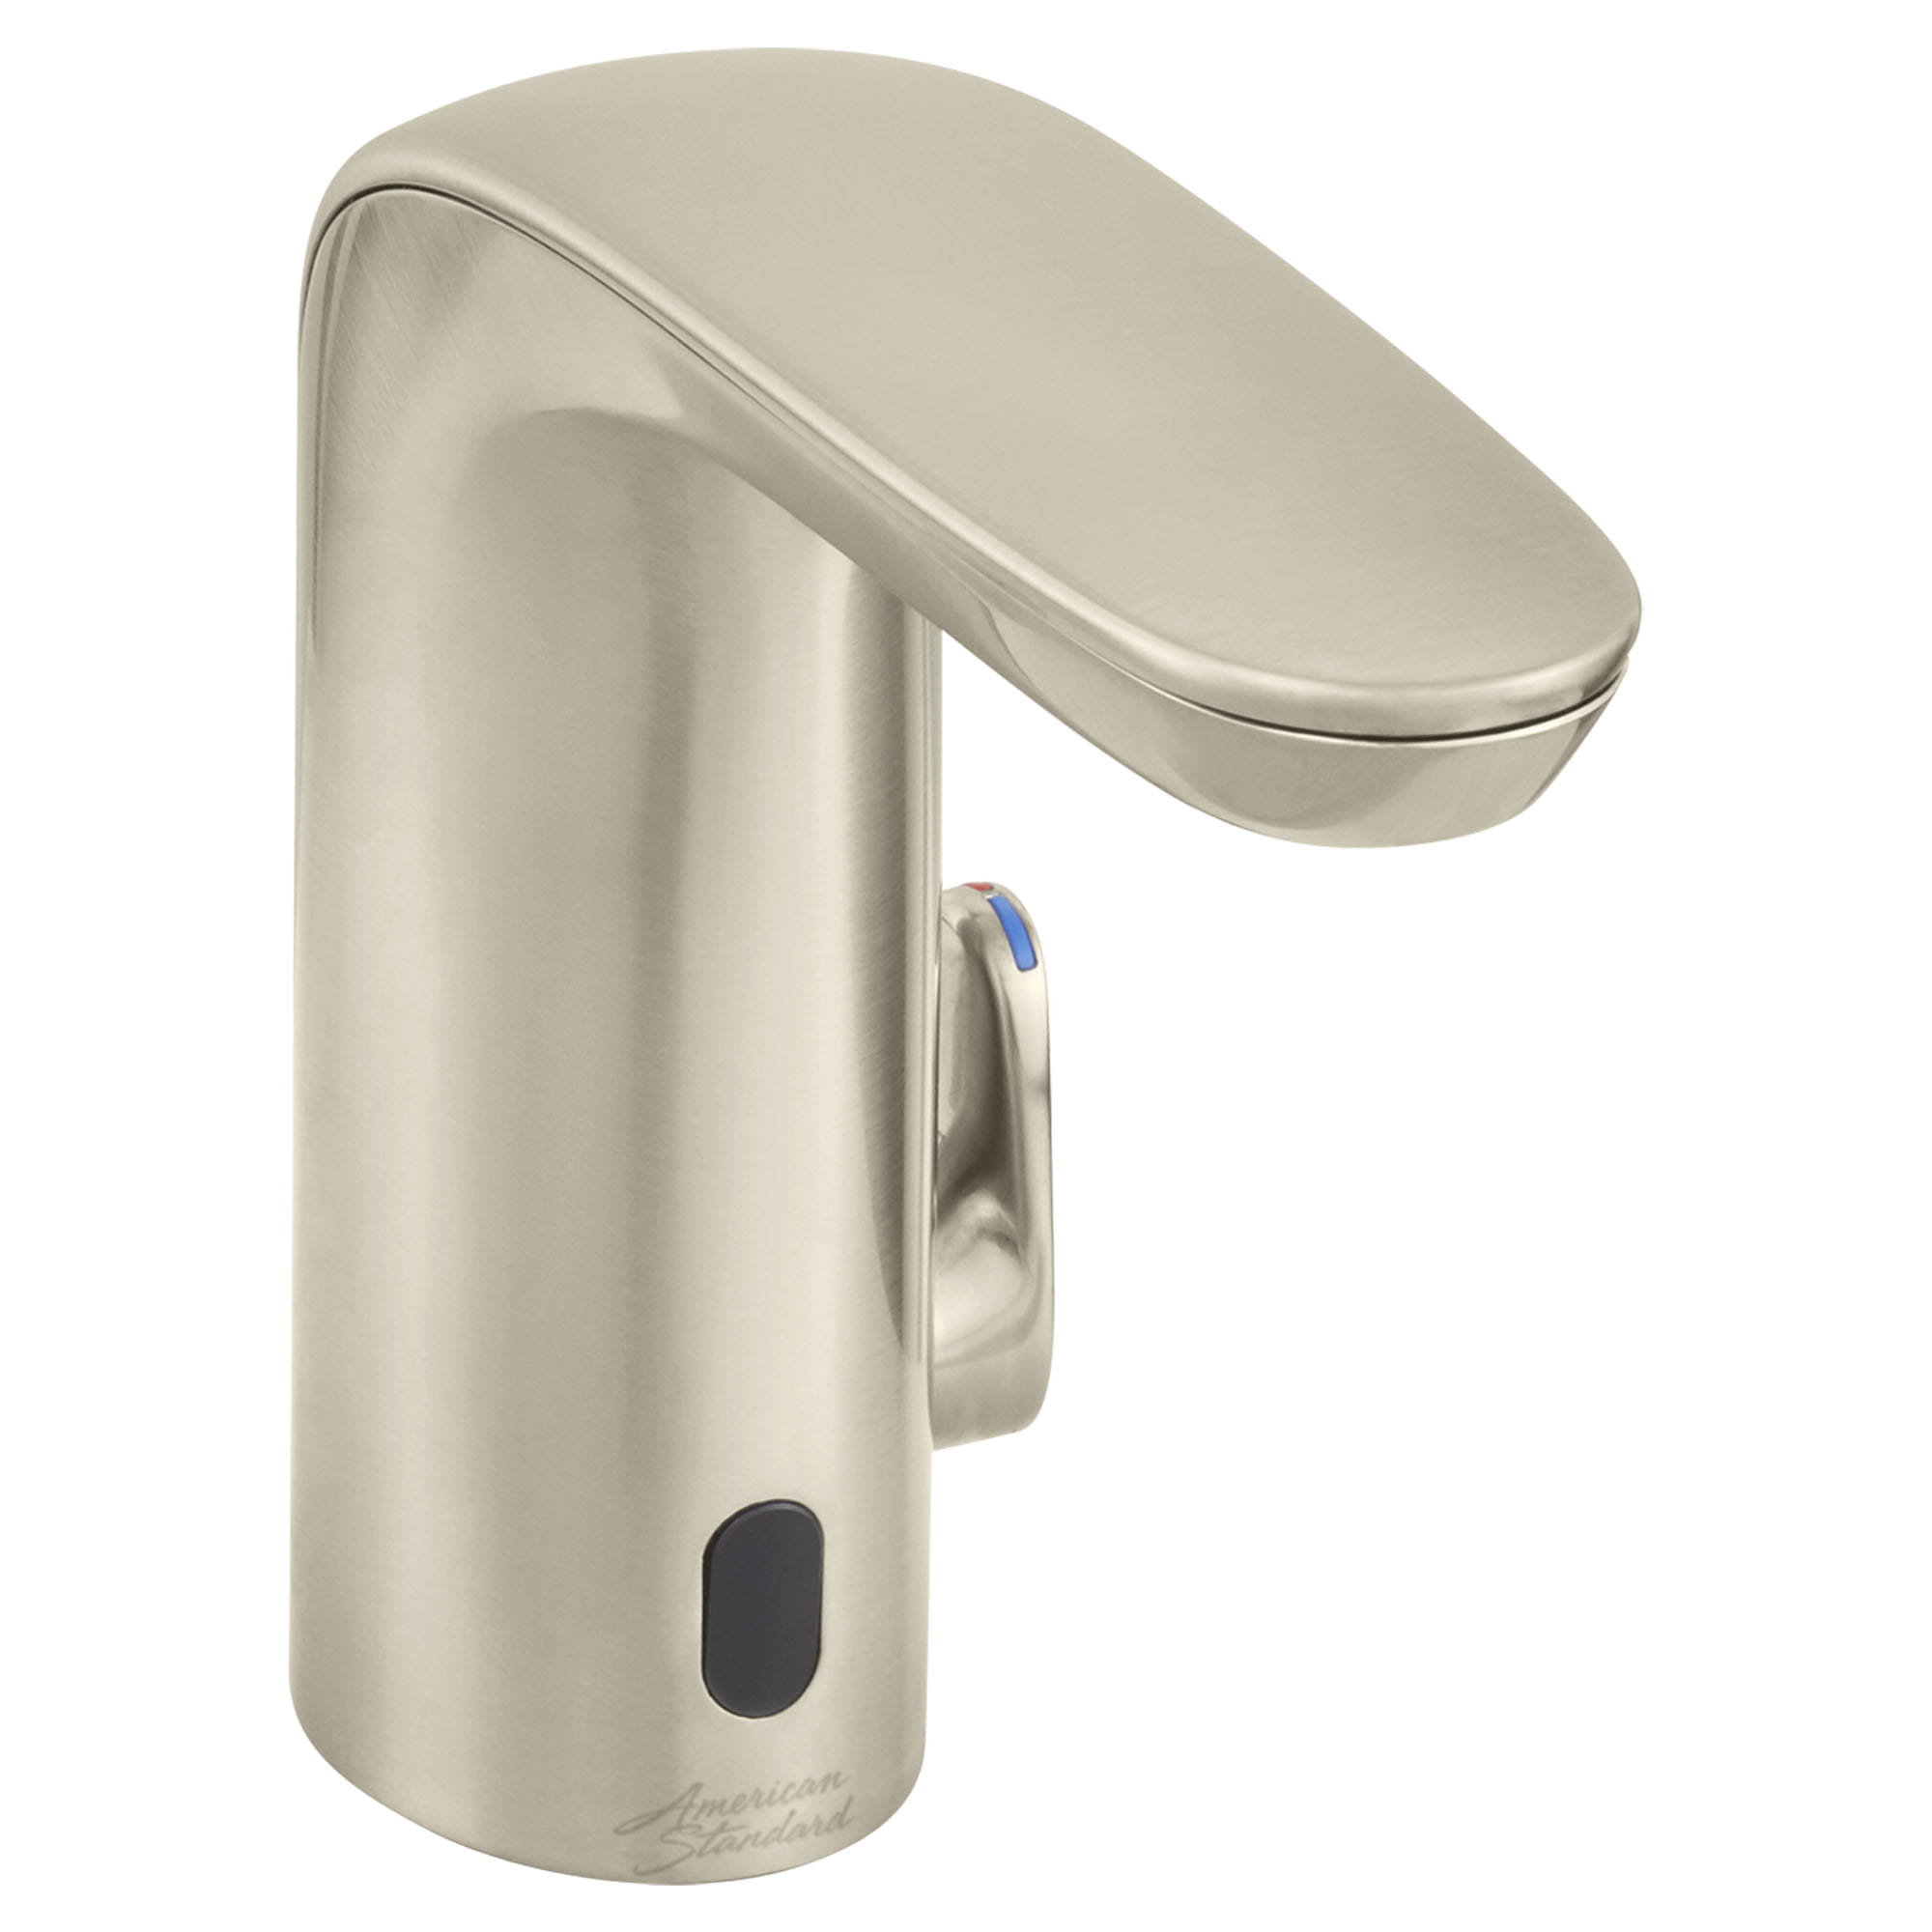 NextGen Selectronic Touchless Faucet Battery Powered With SmarTherm Safety Shut Off  Plus  ADM 035 gpm 13 Lpm   BRUSHED NICKEL